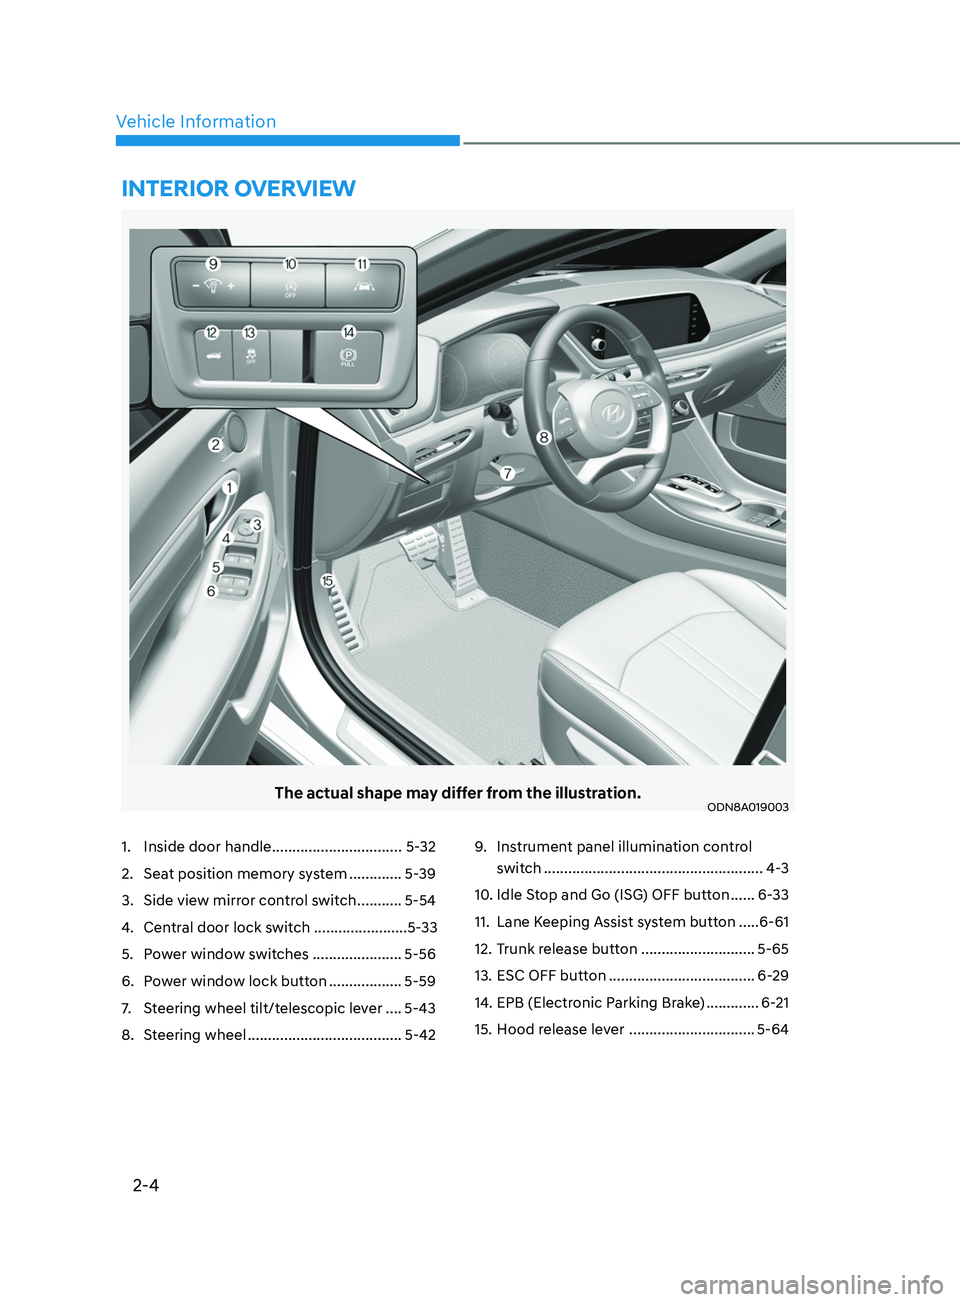 HYUNDAI SONATA LIMITED 2020 User Guide 2-4
Vehicle Information
The actual shape may differ from the illustration.ODN8A019003
1. Inside door handle  ................................ 5-32
2.  
Sea
 t position memory system   .............5-3